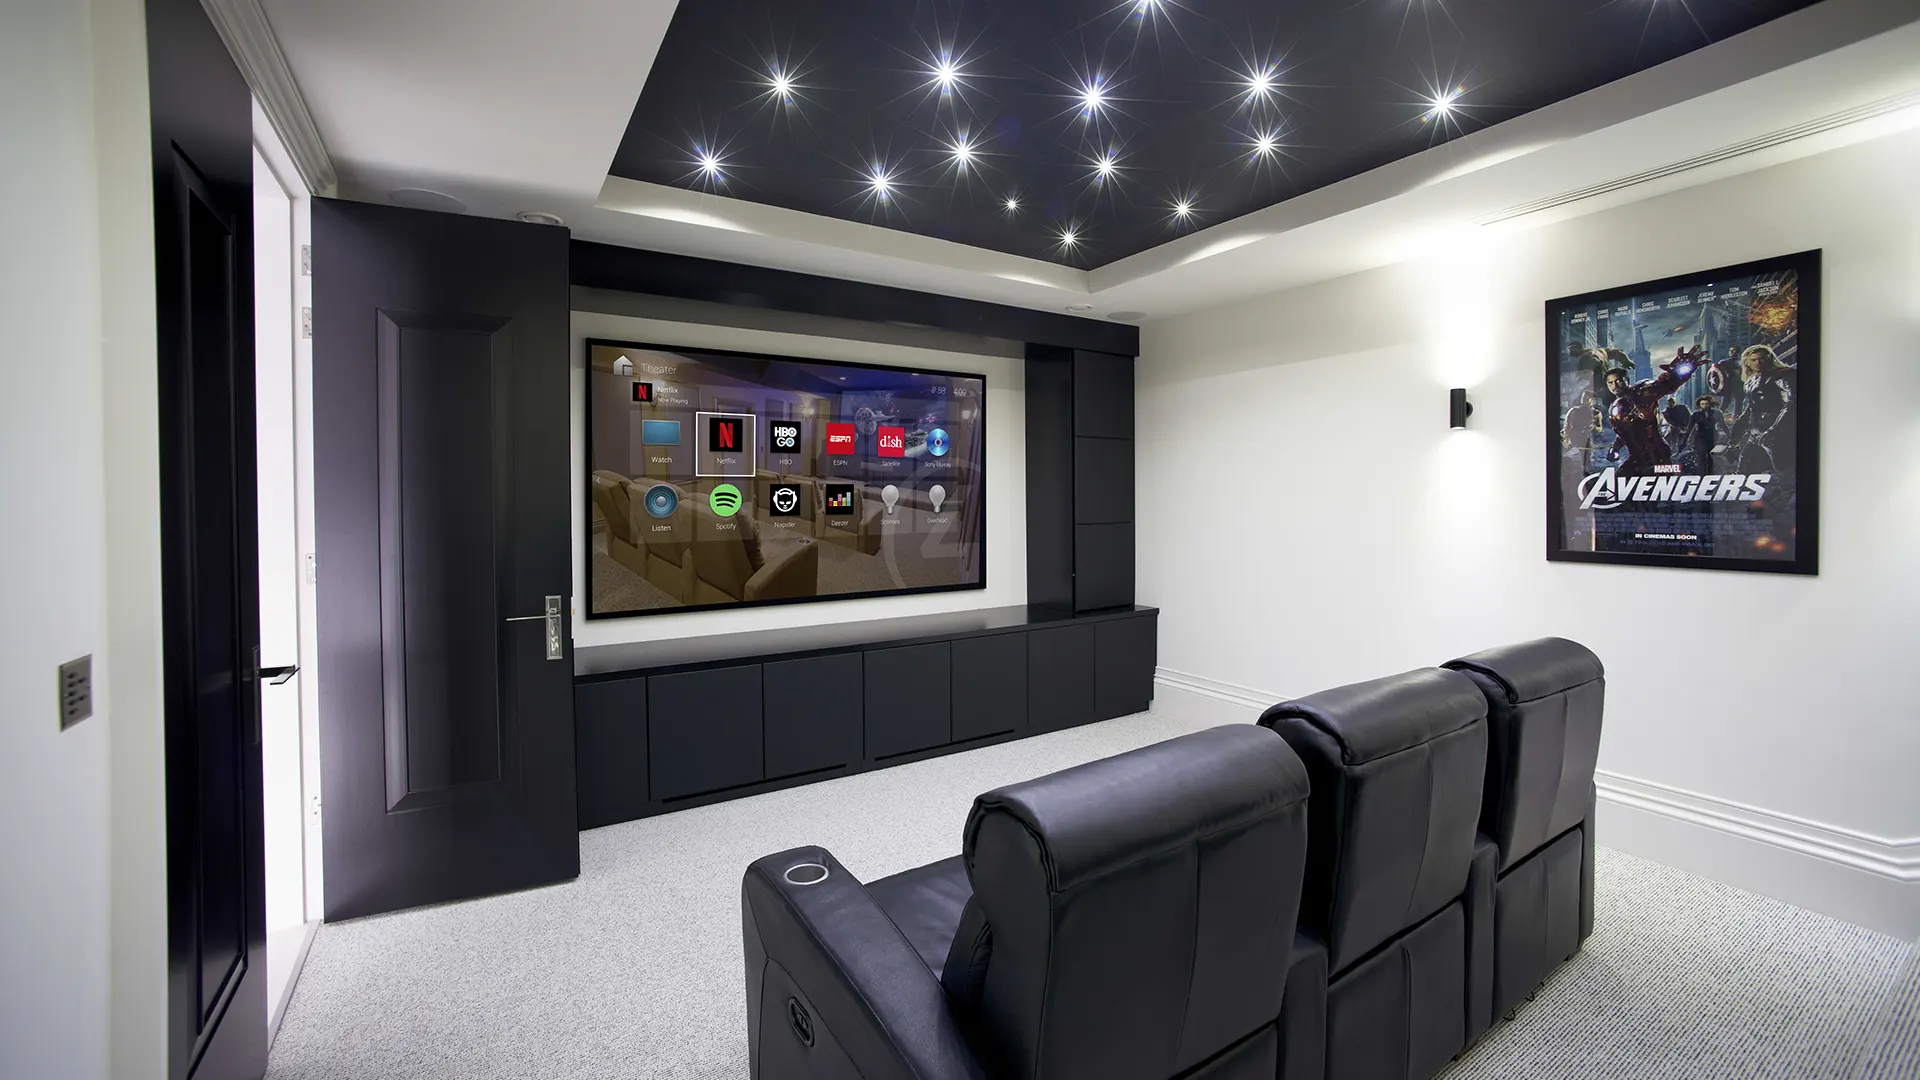 Home Theater installation in Green Bay, WI